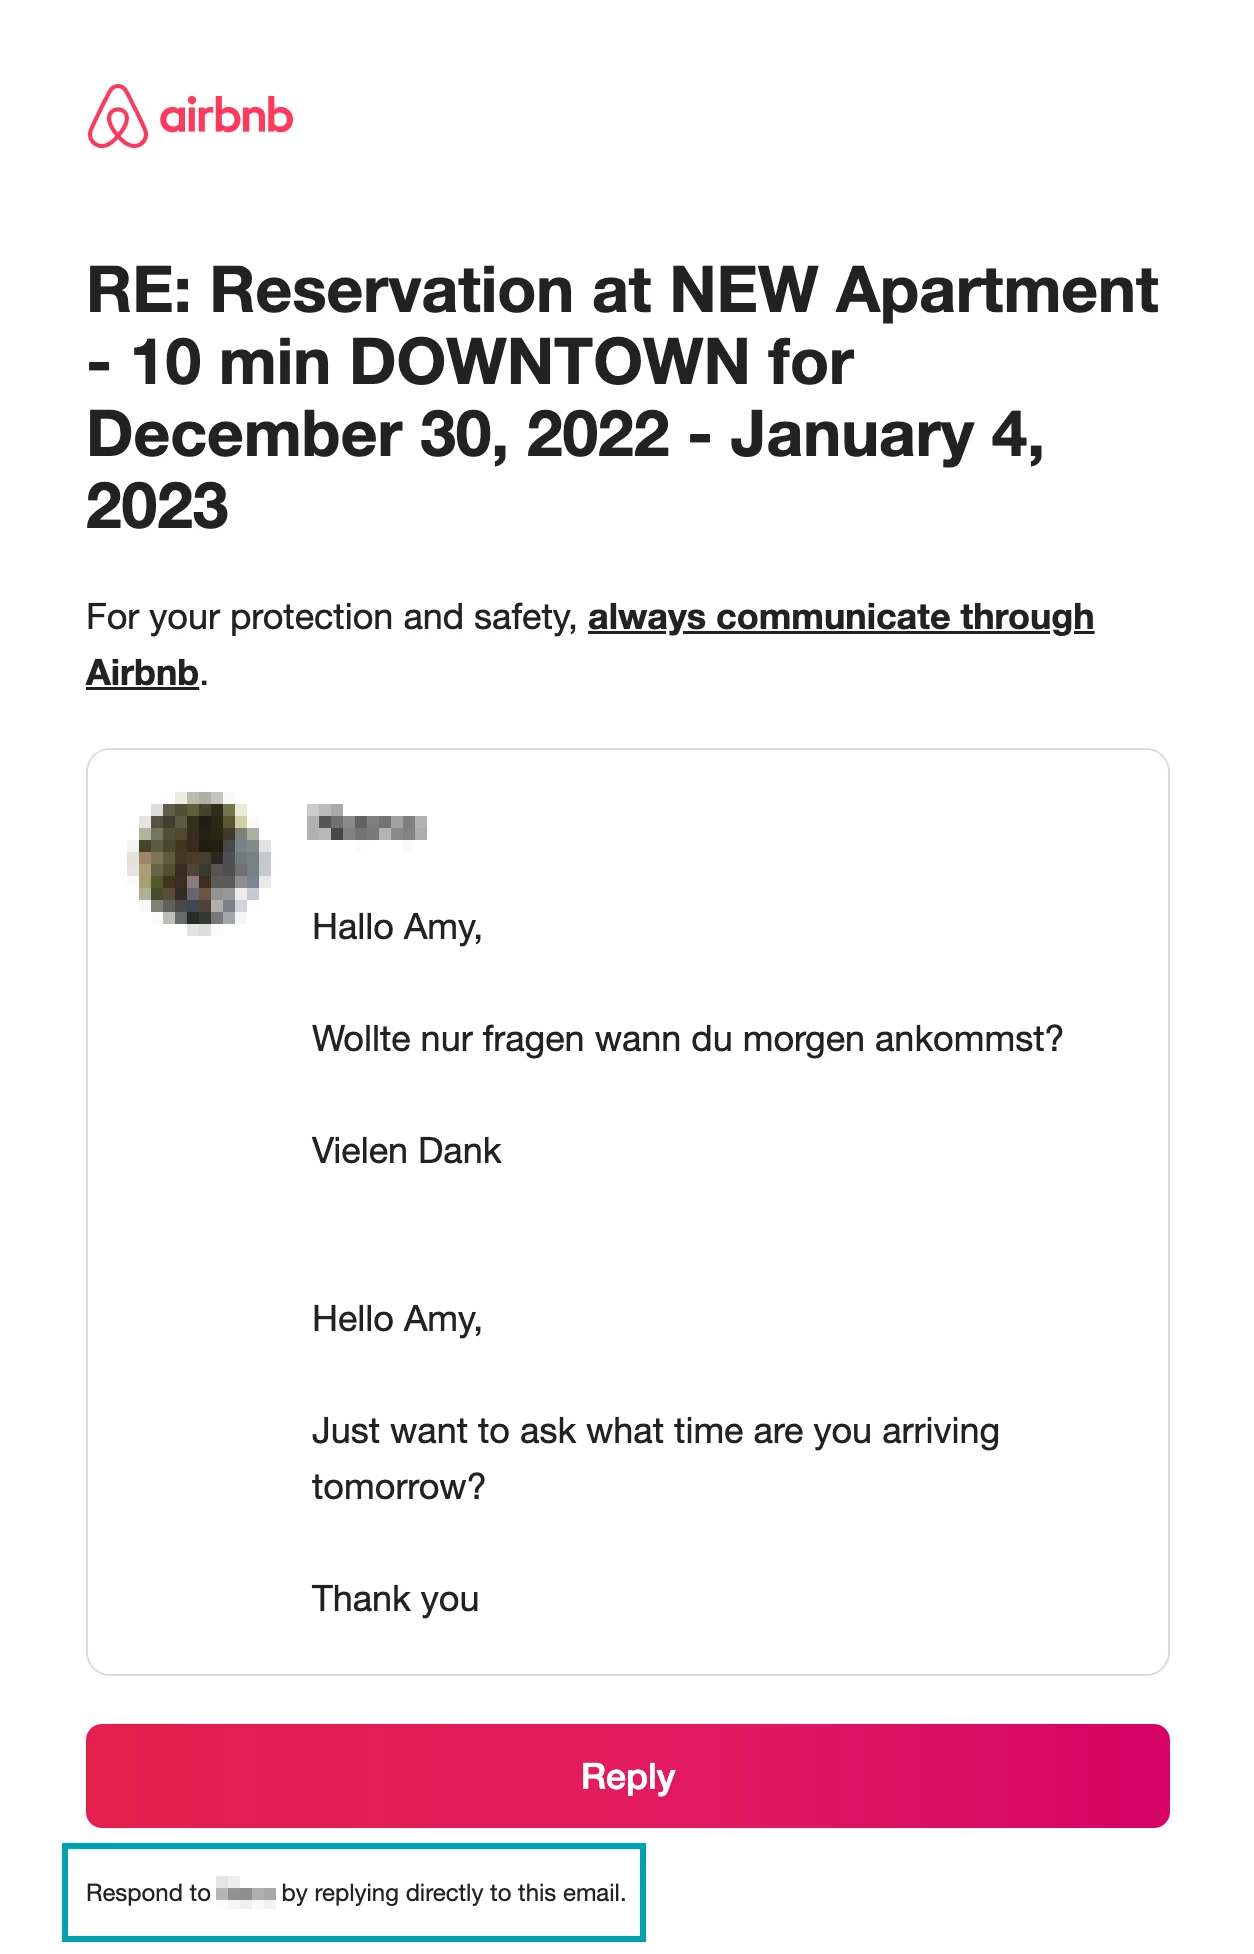 Example of an email message that can be replied to and uses inbound routing from Airbnb.